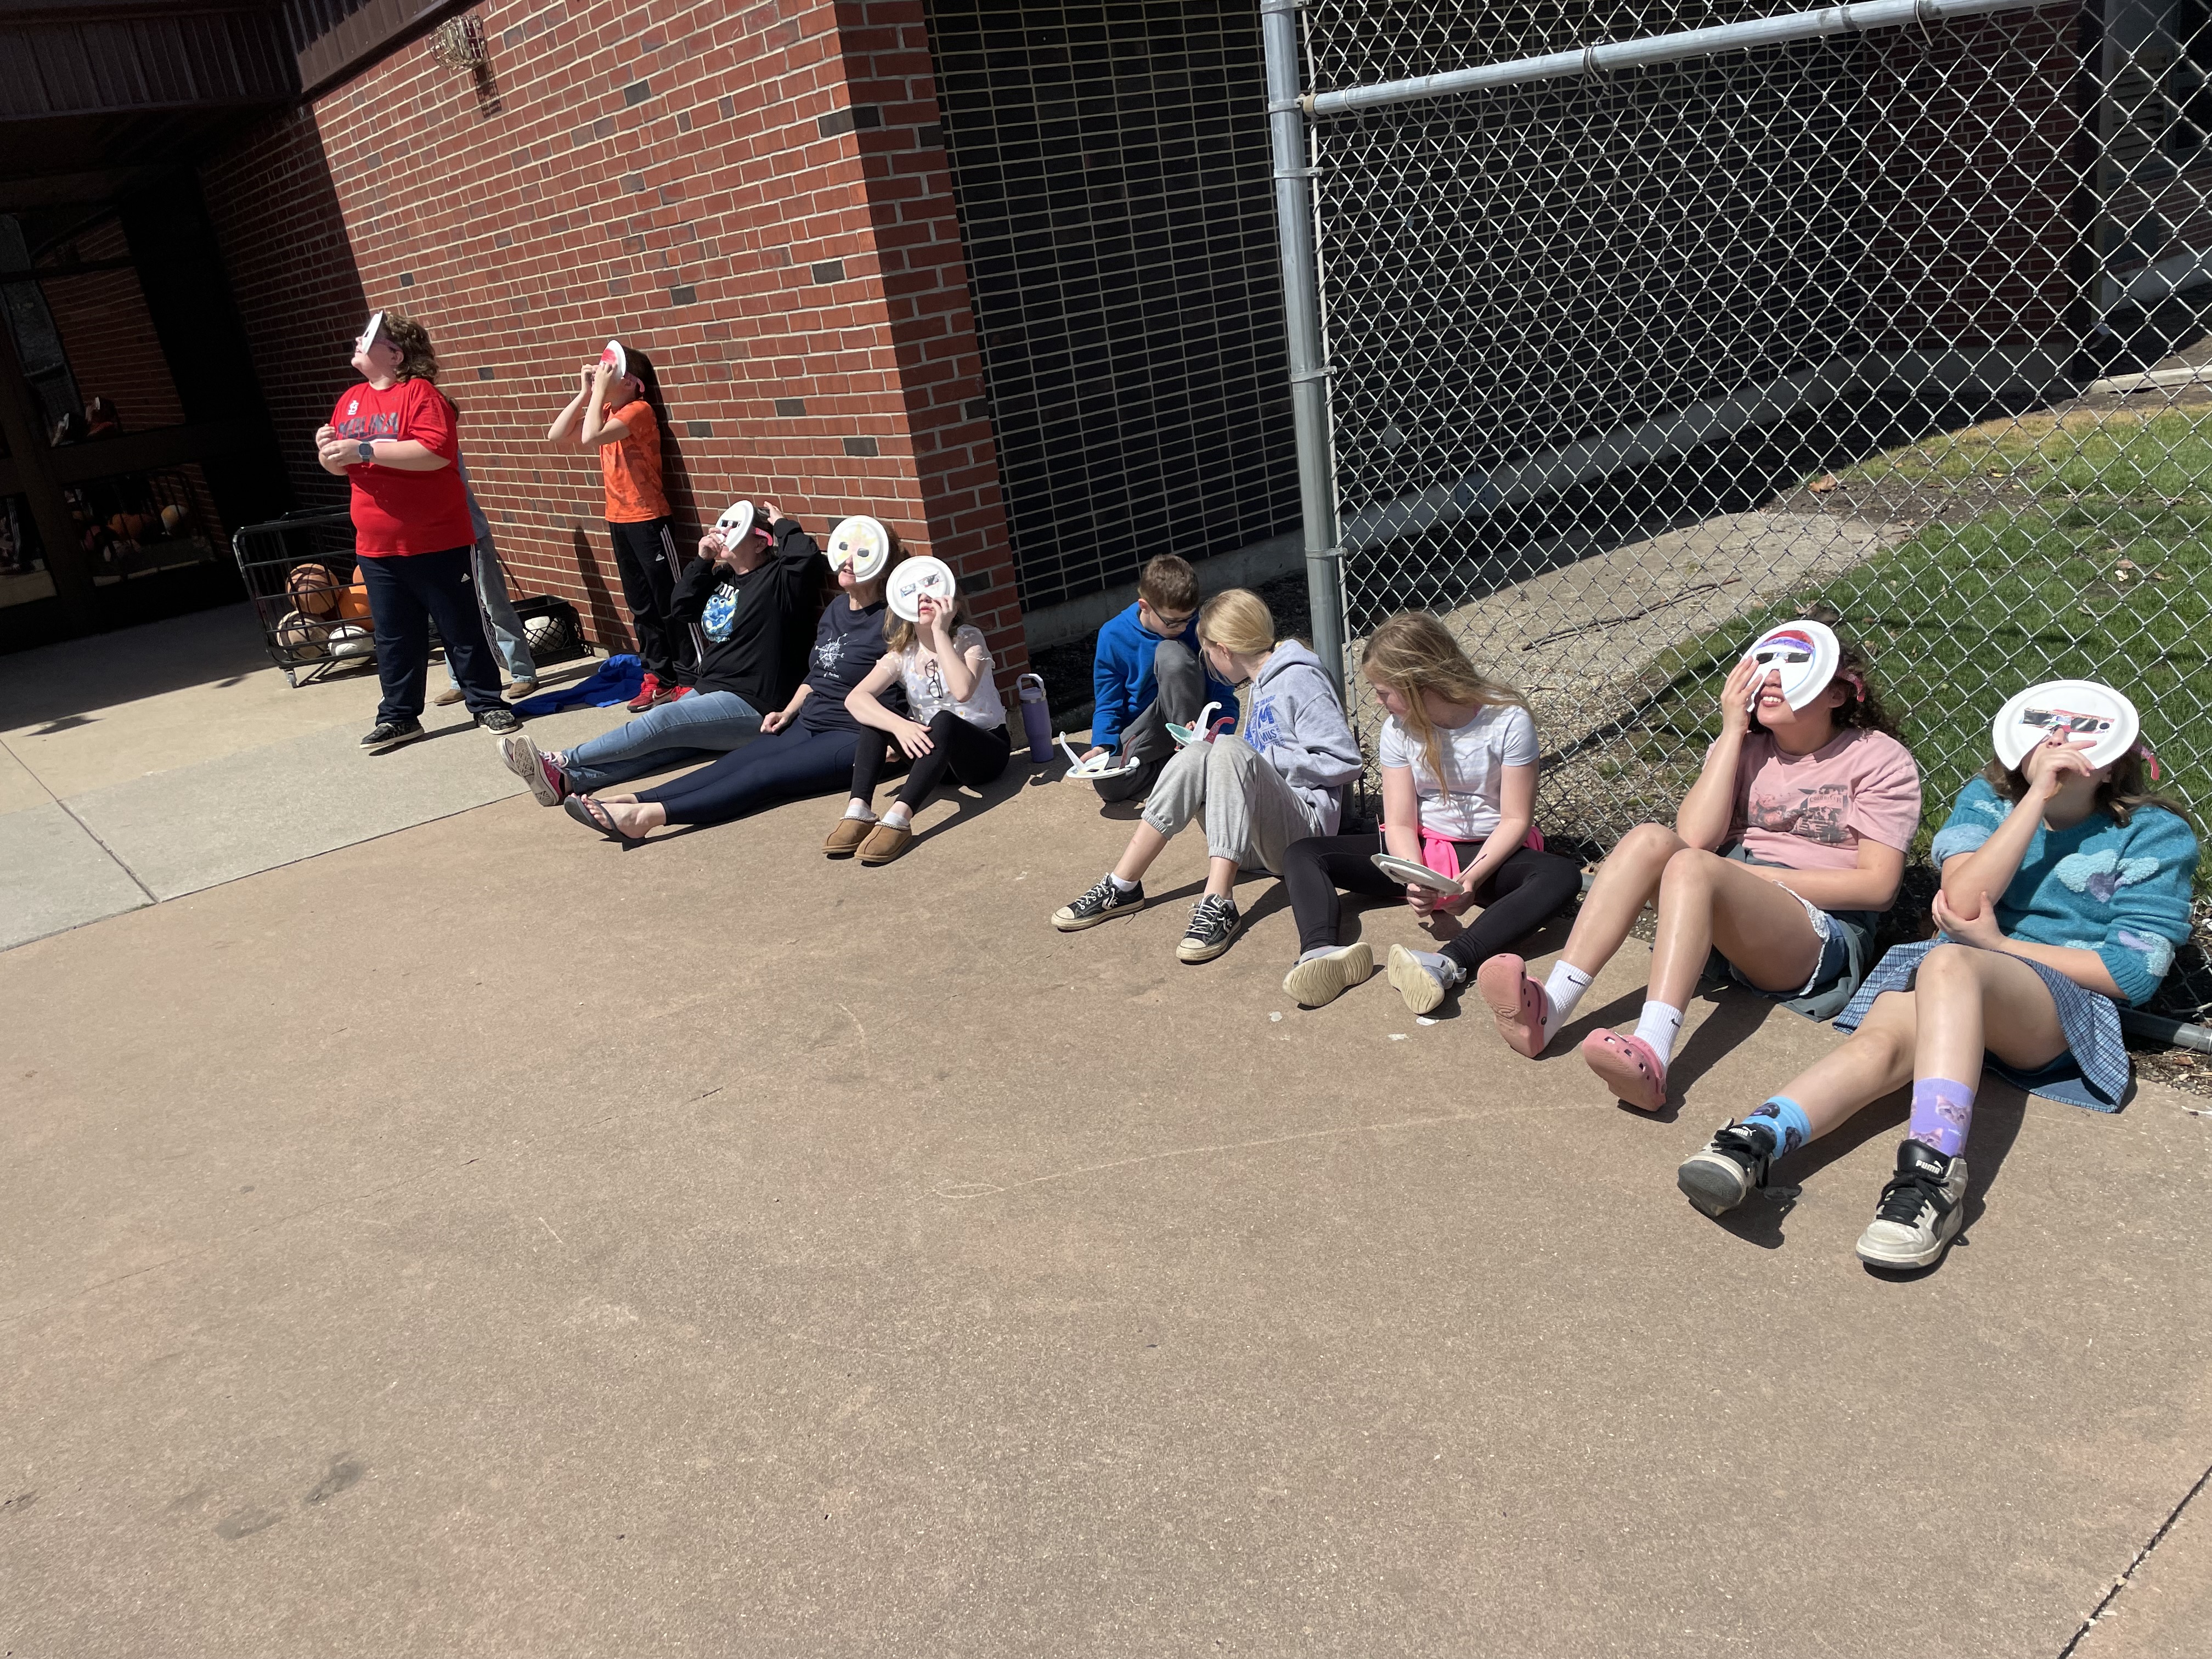 Eclipse at South Elementary